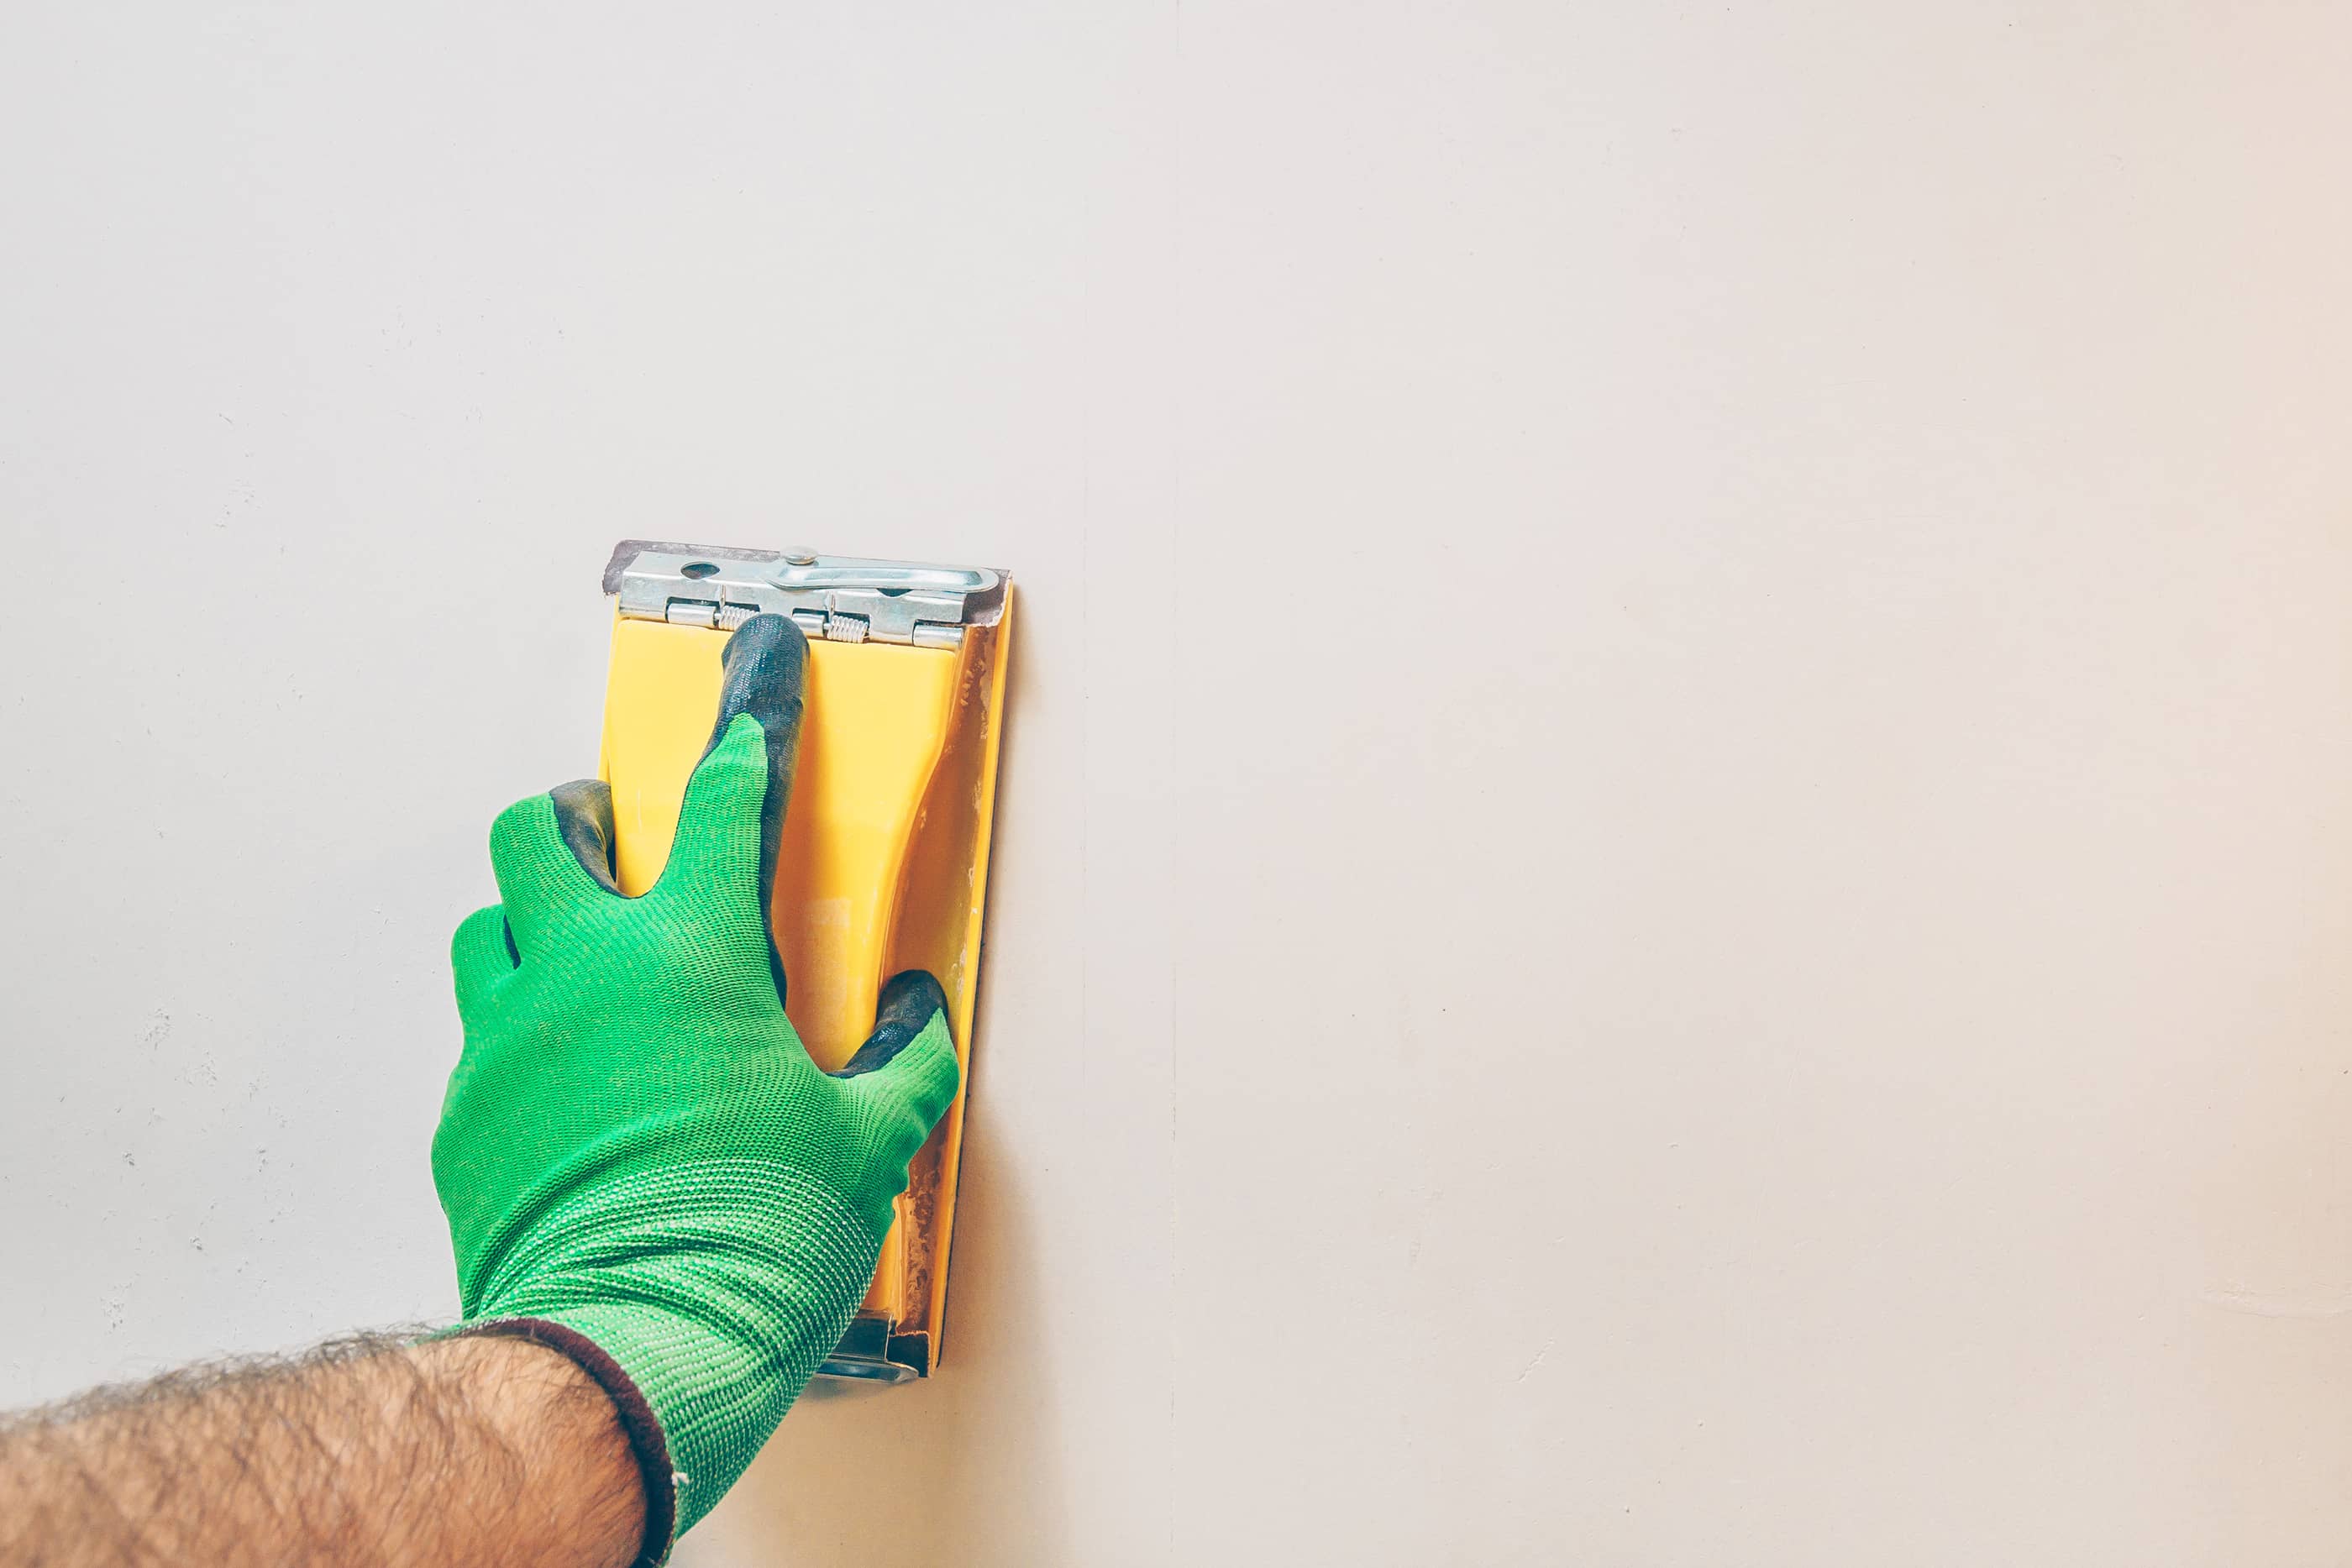 Sand any excess plaster off the wall until matching smoothness with the rest of the wall